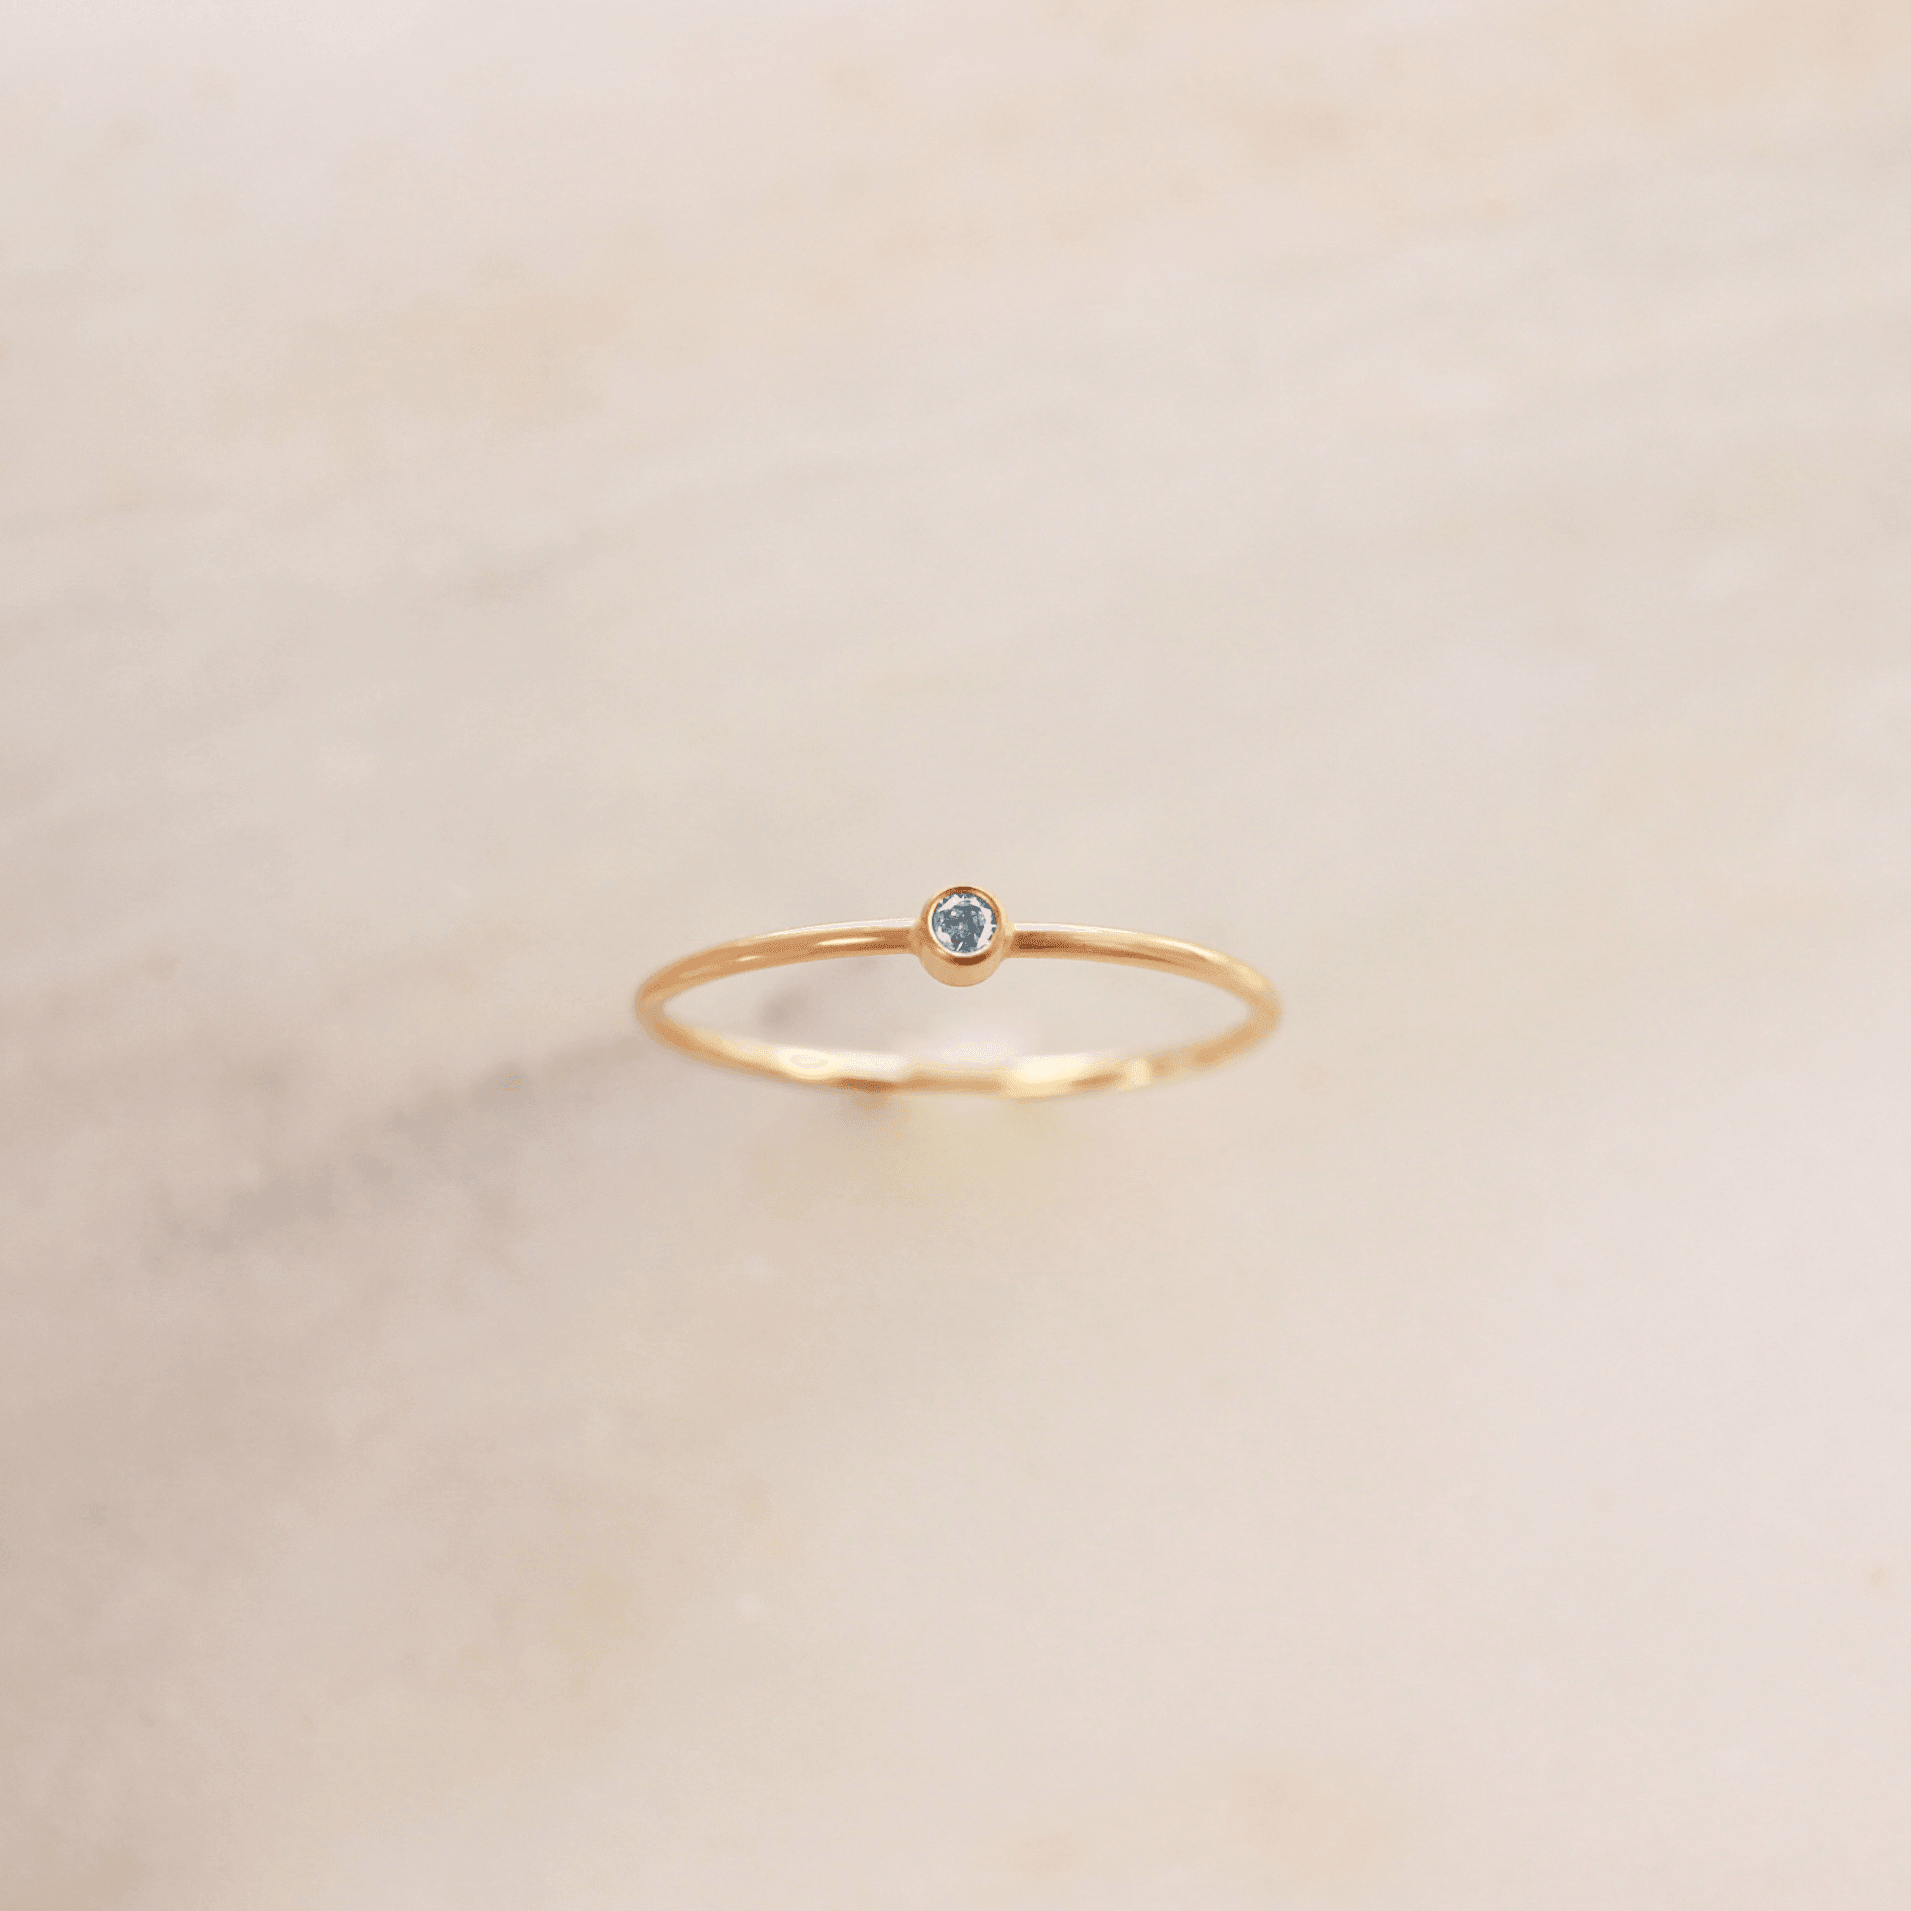 Tiny March Birthstone Ring ∙ Aquamarine - Nolia Jewelry - Meaningful + Sustainably Handcrafted Jewelry